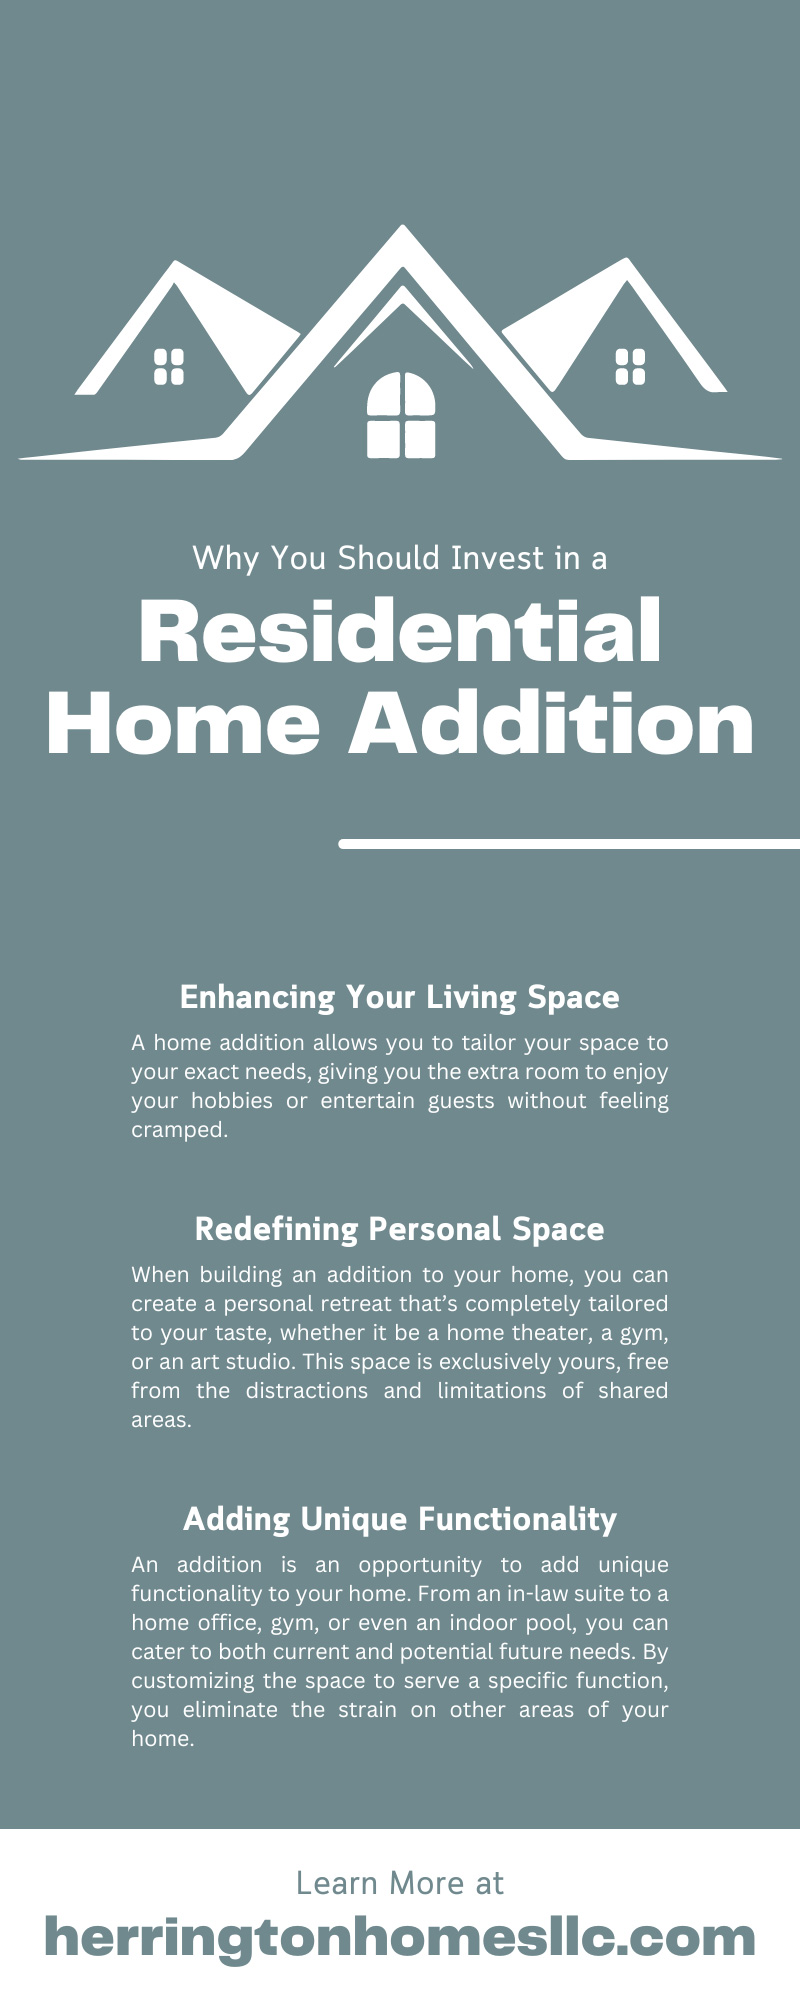 Why You Should Invest in a Residential Home Addition
